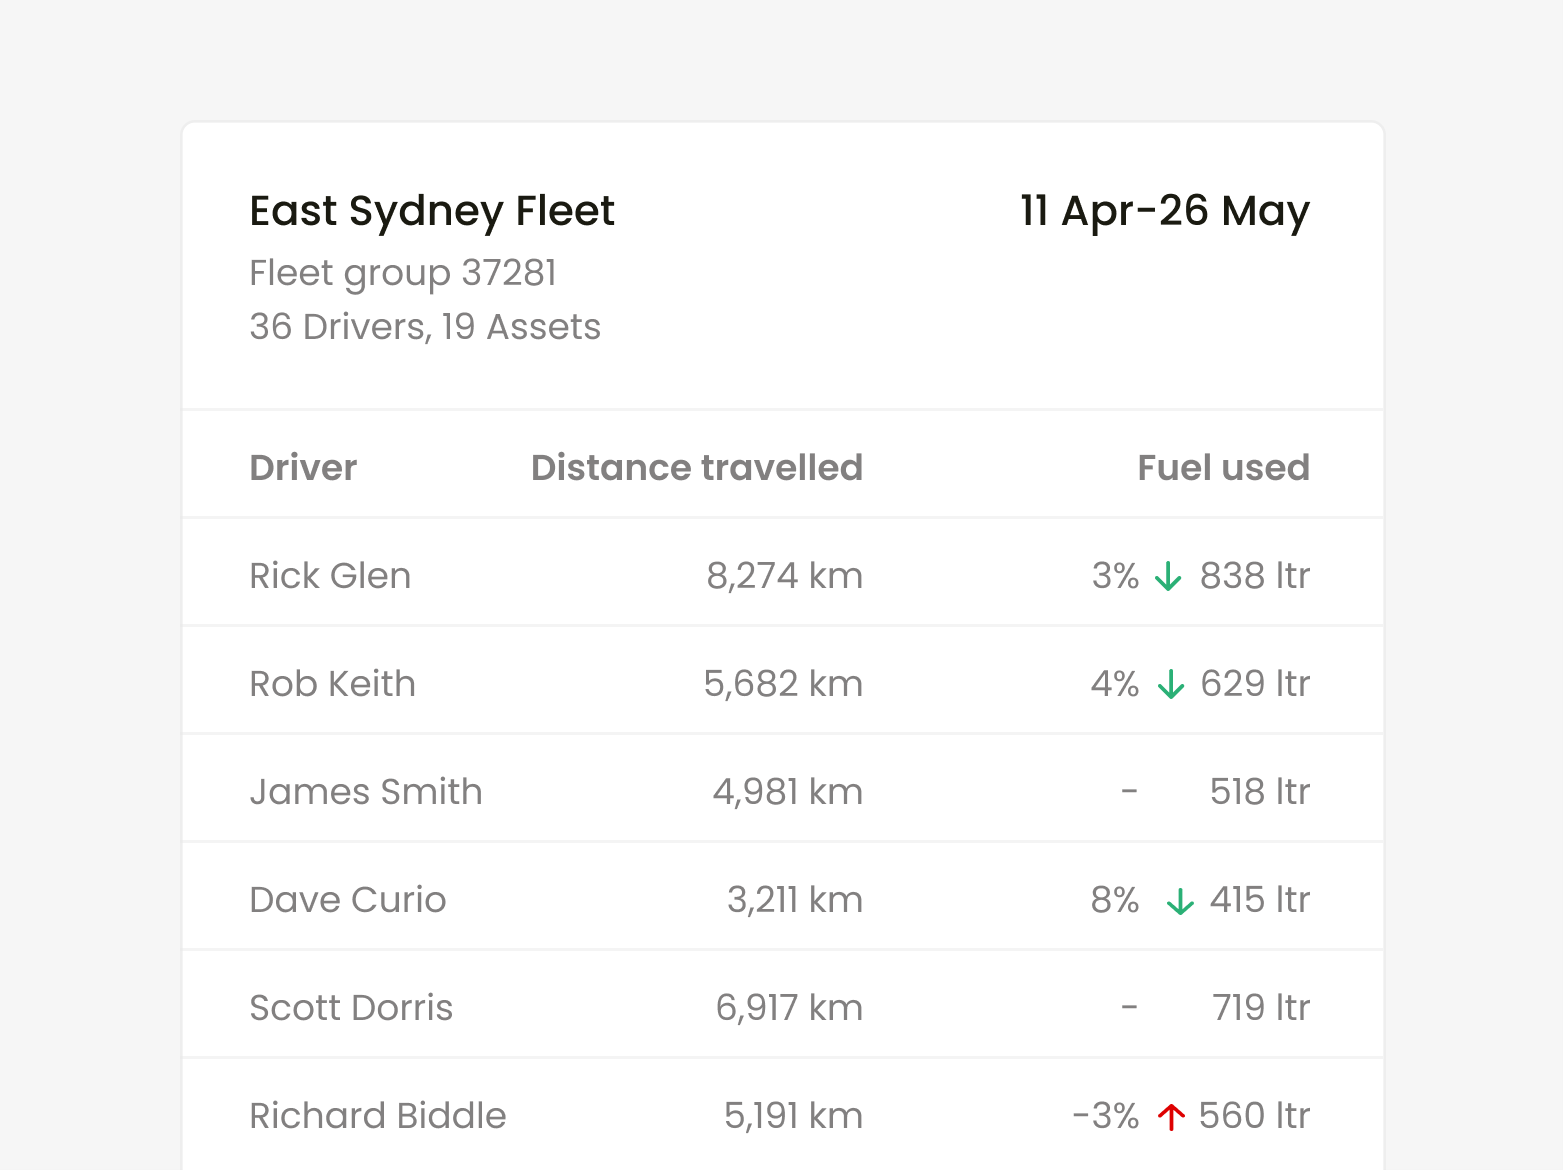 An Inseego fleet tracking report on fuel usage.